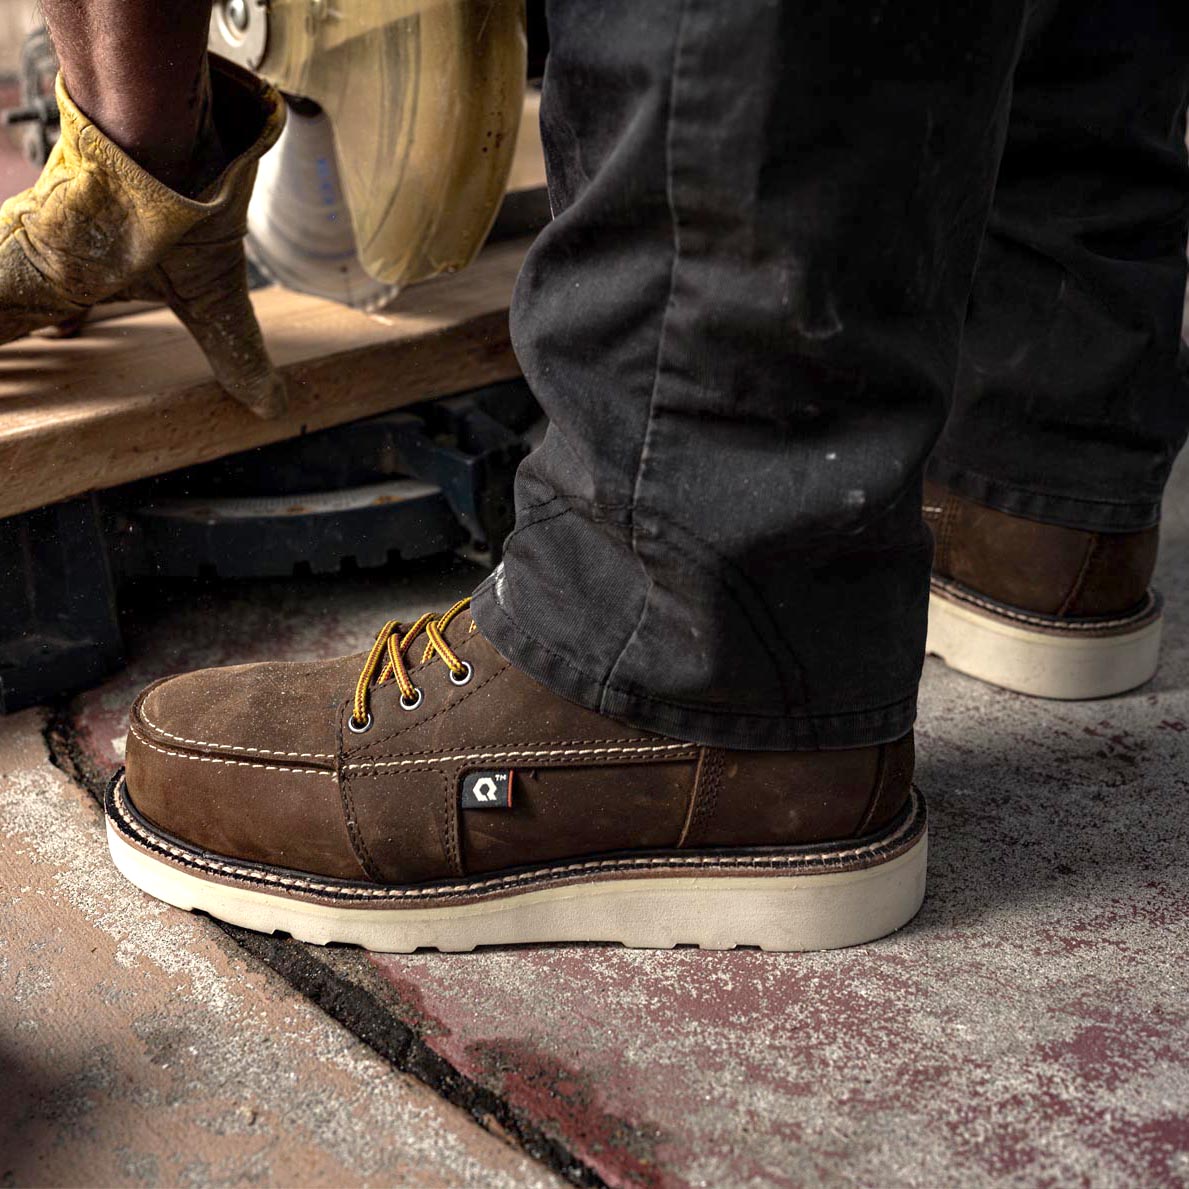 QLTY | Work Boot - The DNVR Steel Toe - Safety Toe, Moc Toe, Goodyear ...